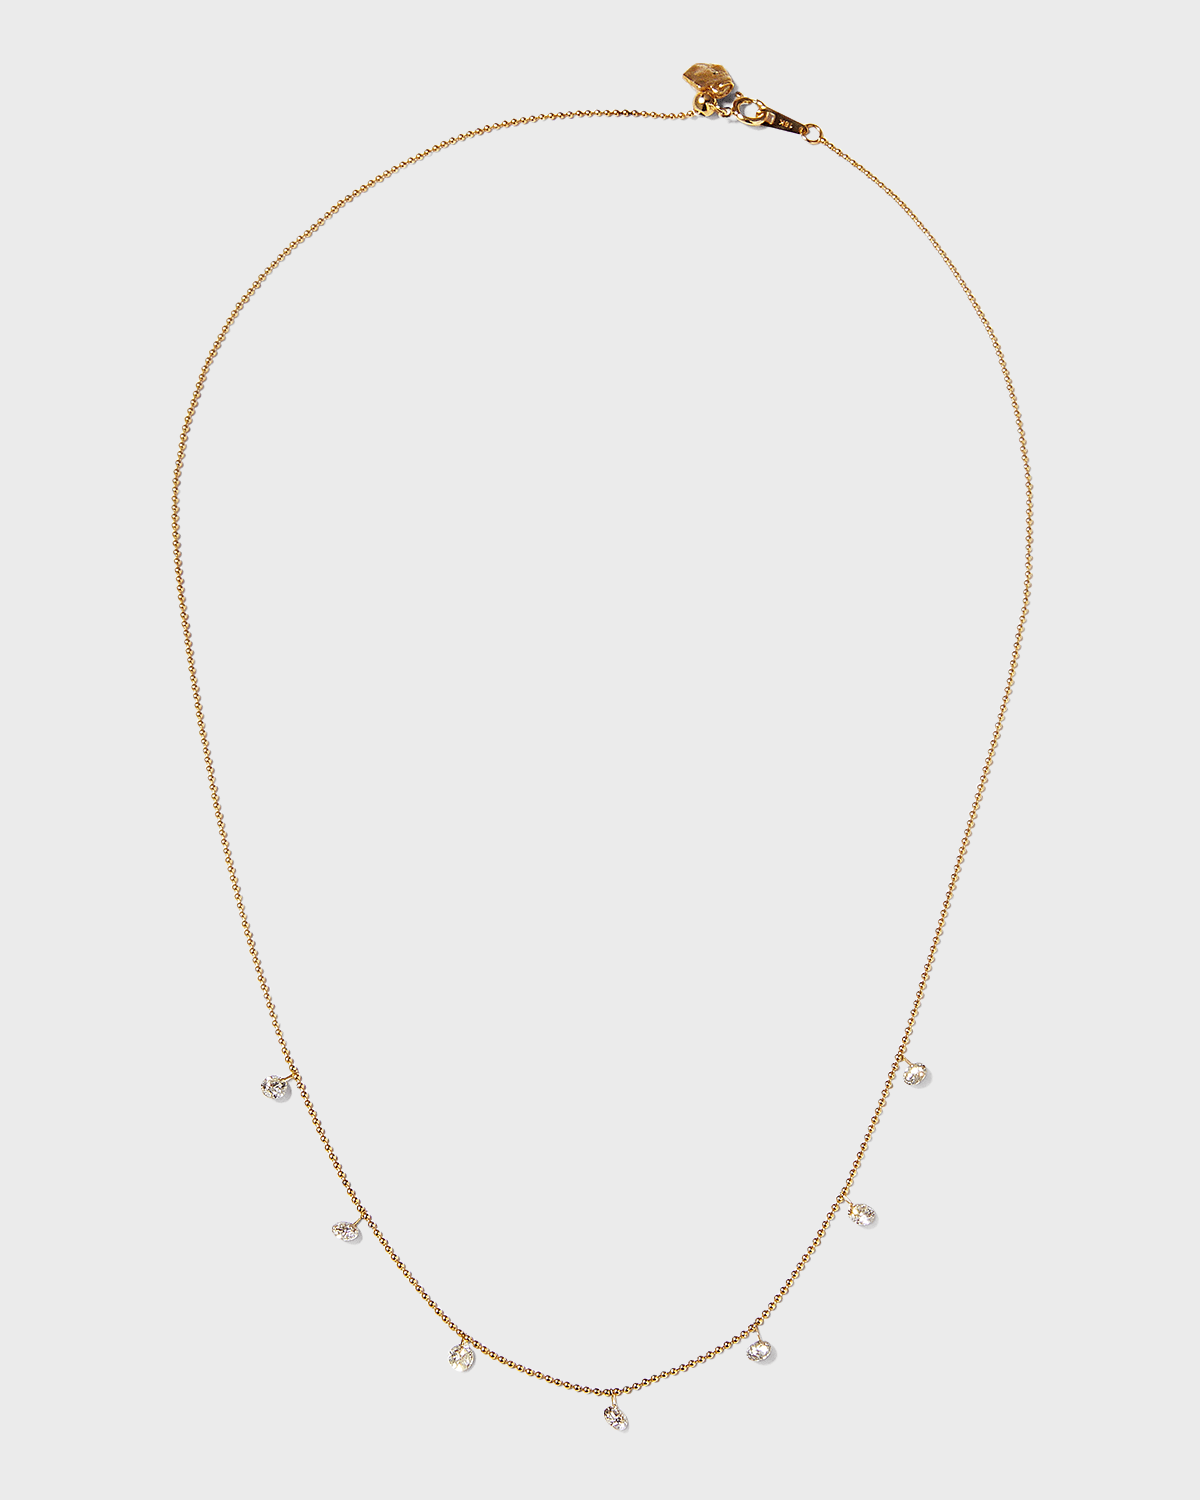 Graziela Gems Small Floating Diamond Necklace in Yellow